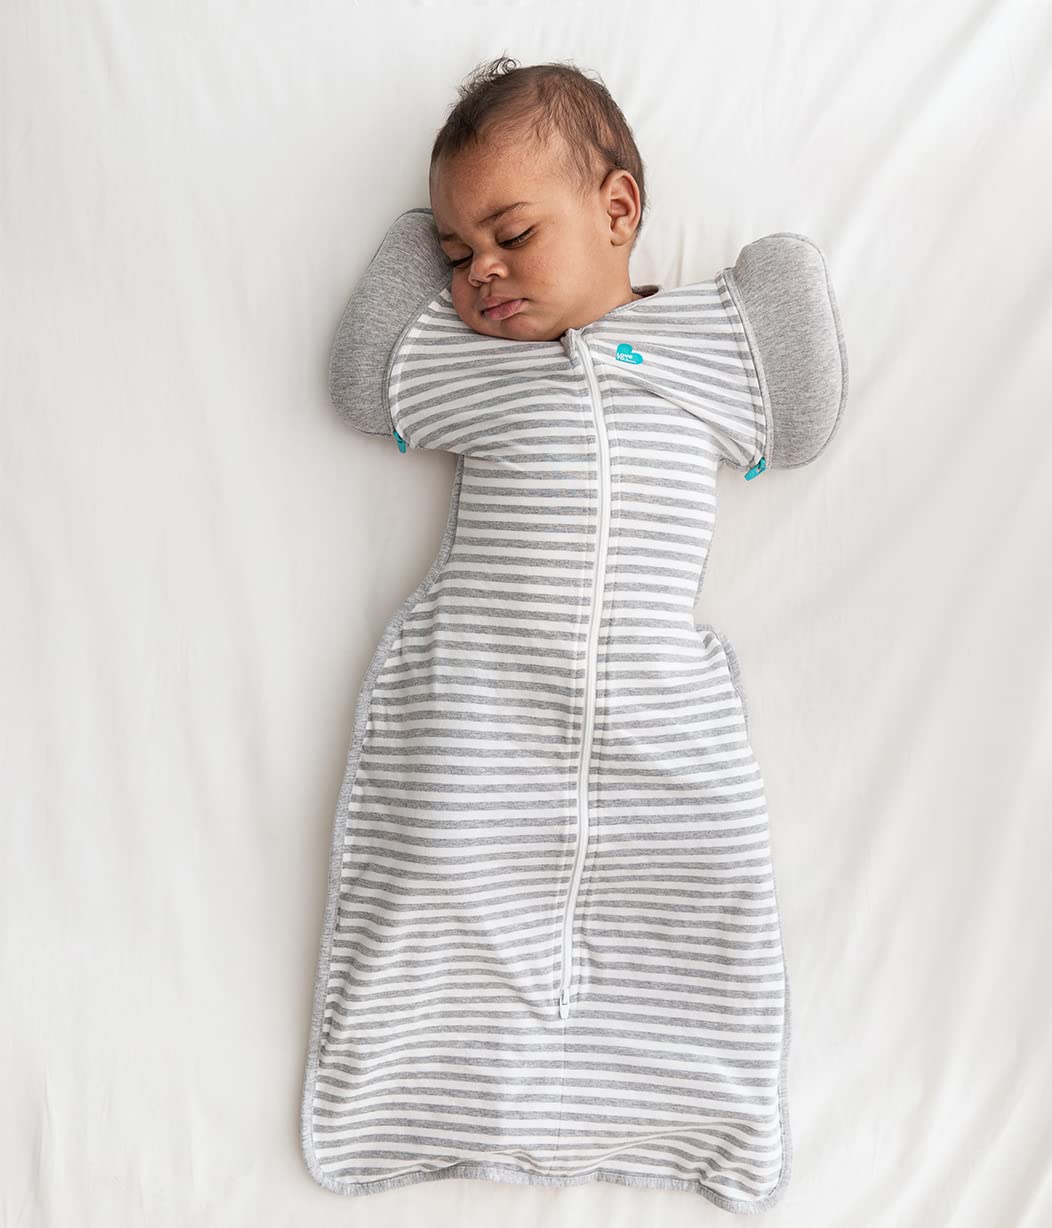 Love to Dream Swaddle UP Transition Bag Self-Soothing Sleep Sack 24-30.5 lbs, Patented Zip-Off Wings, Gently Help Baby Safely Transition from Swaddling to Arms Free Before Rolling, 1.0TOG Gray, XL